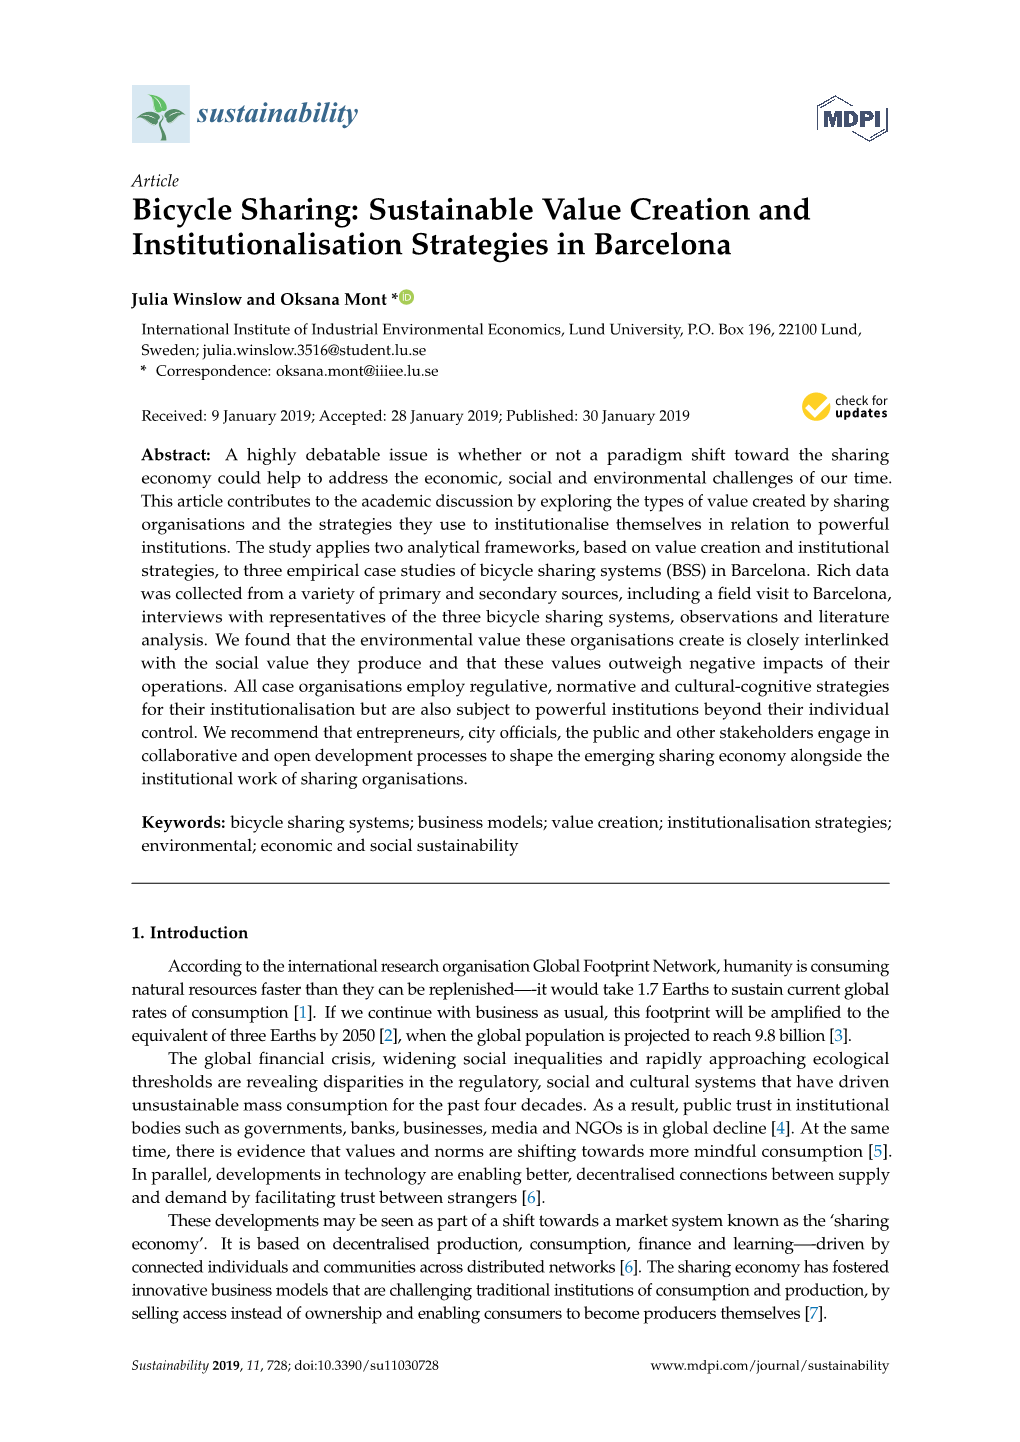 Bicycle Sharing: Sustainable Value Creation and Institutionalisation Strategies in Barcelona